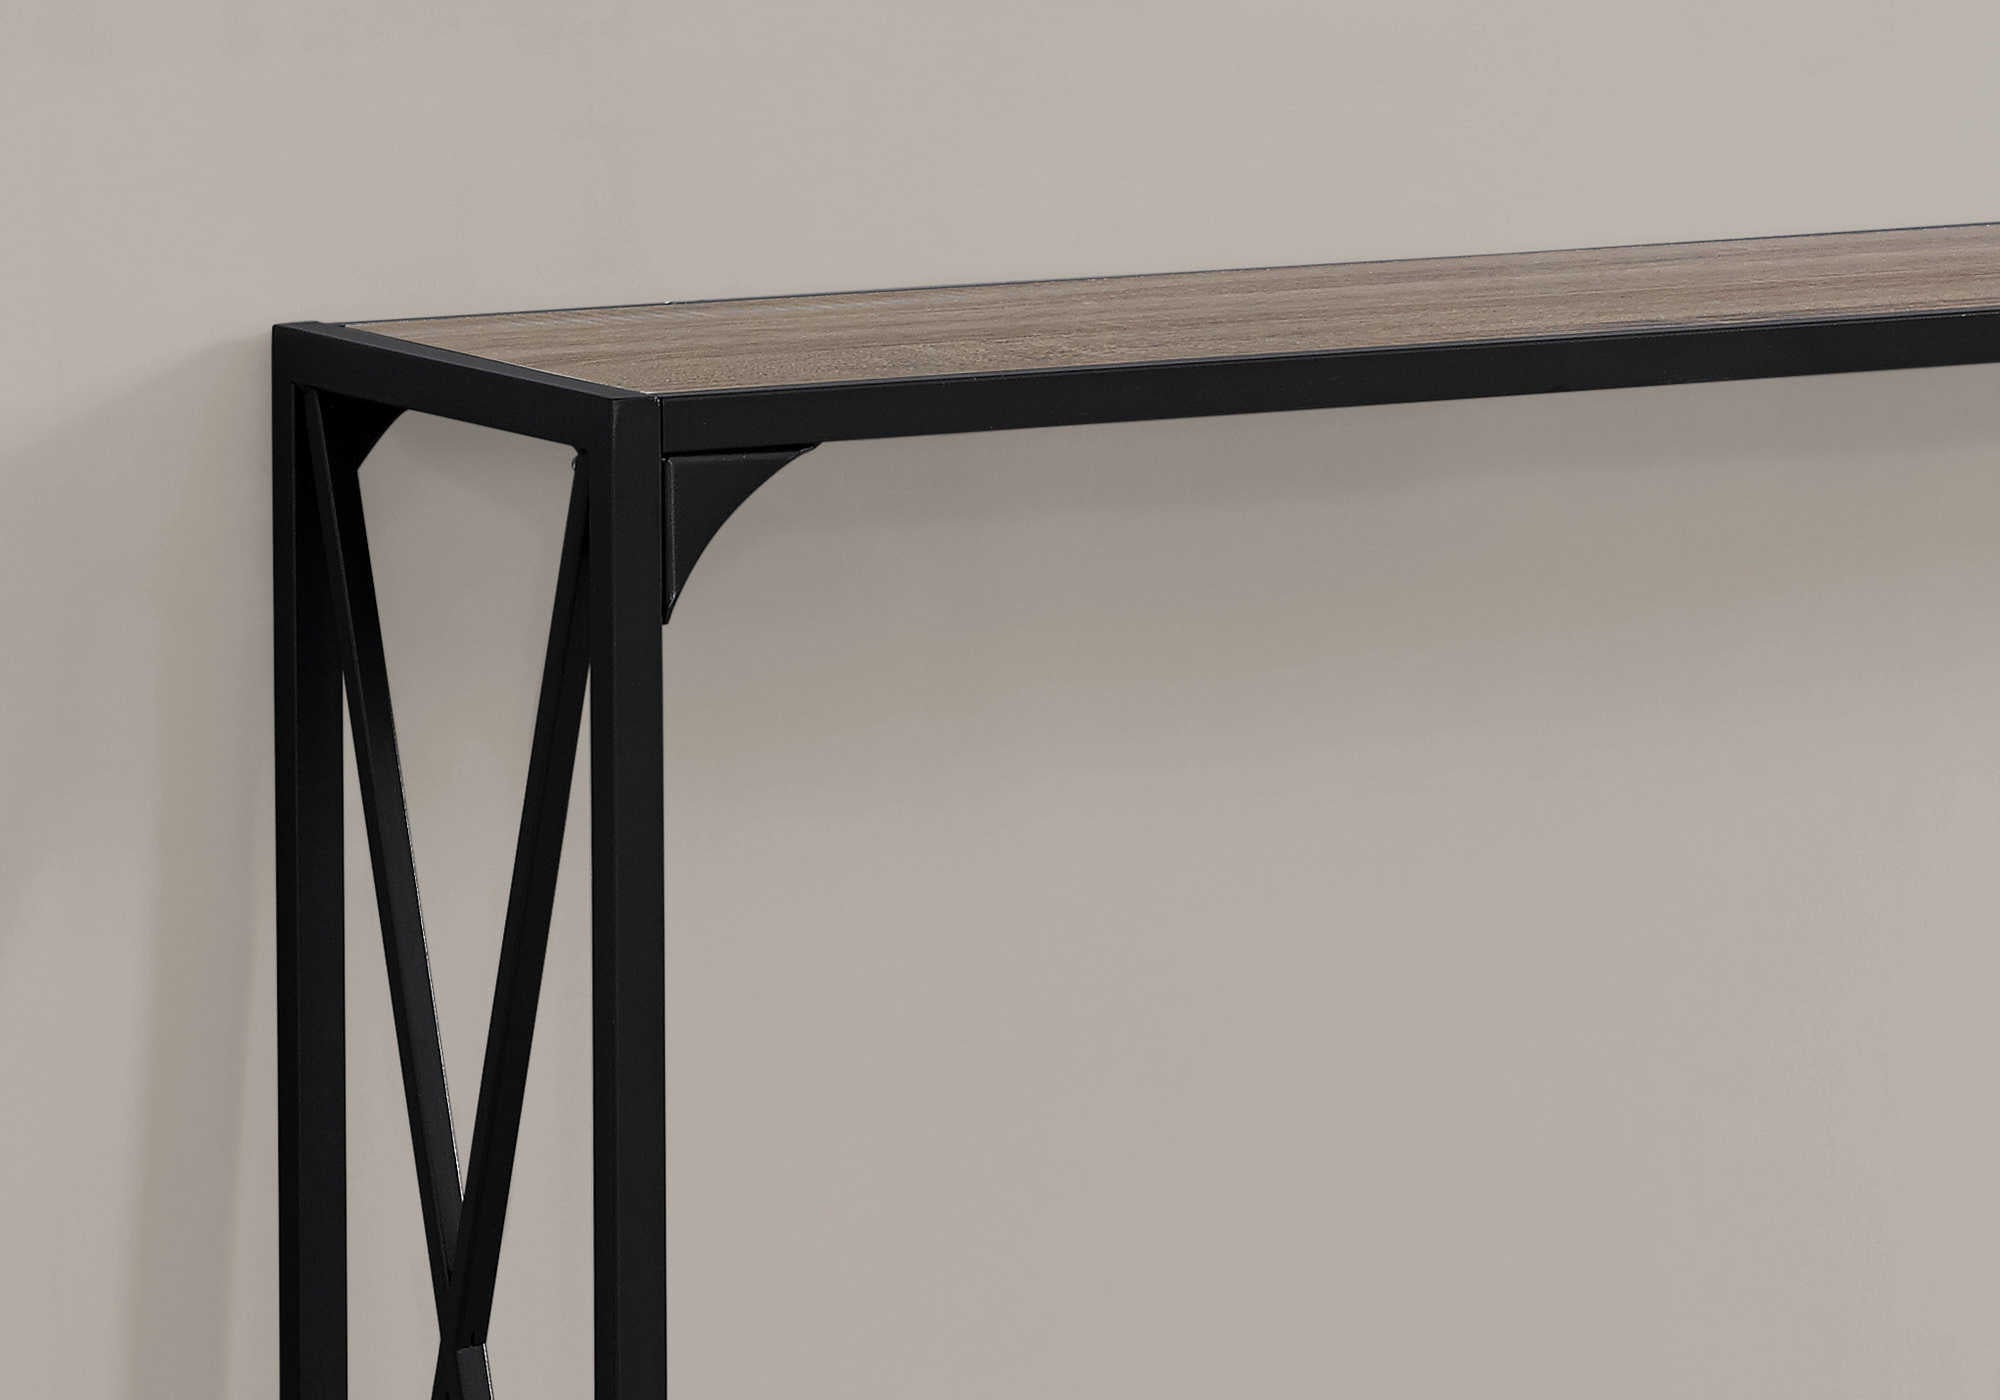 I 2125 - ACCENT TABLE - 48"L / DARK TAUPE / BLACK HALL CONSOLE BY MONARCH SPECIALTIES INC